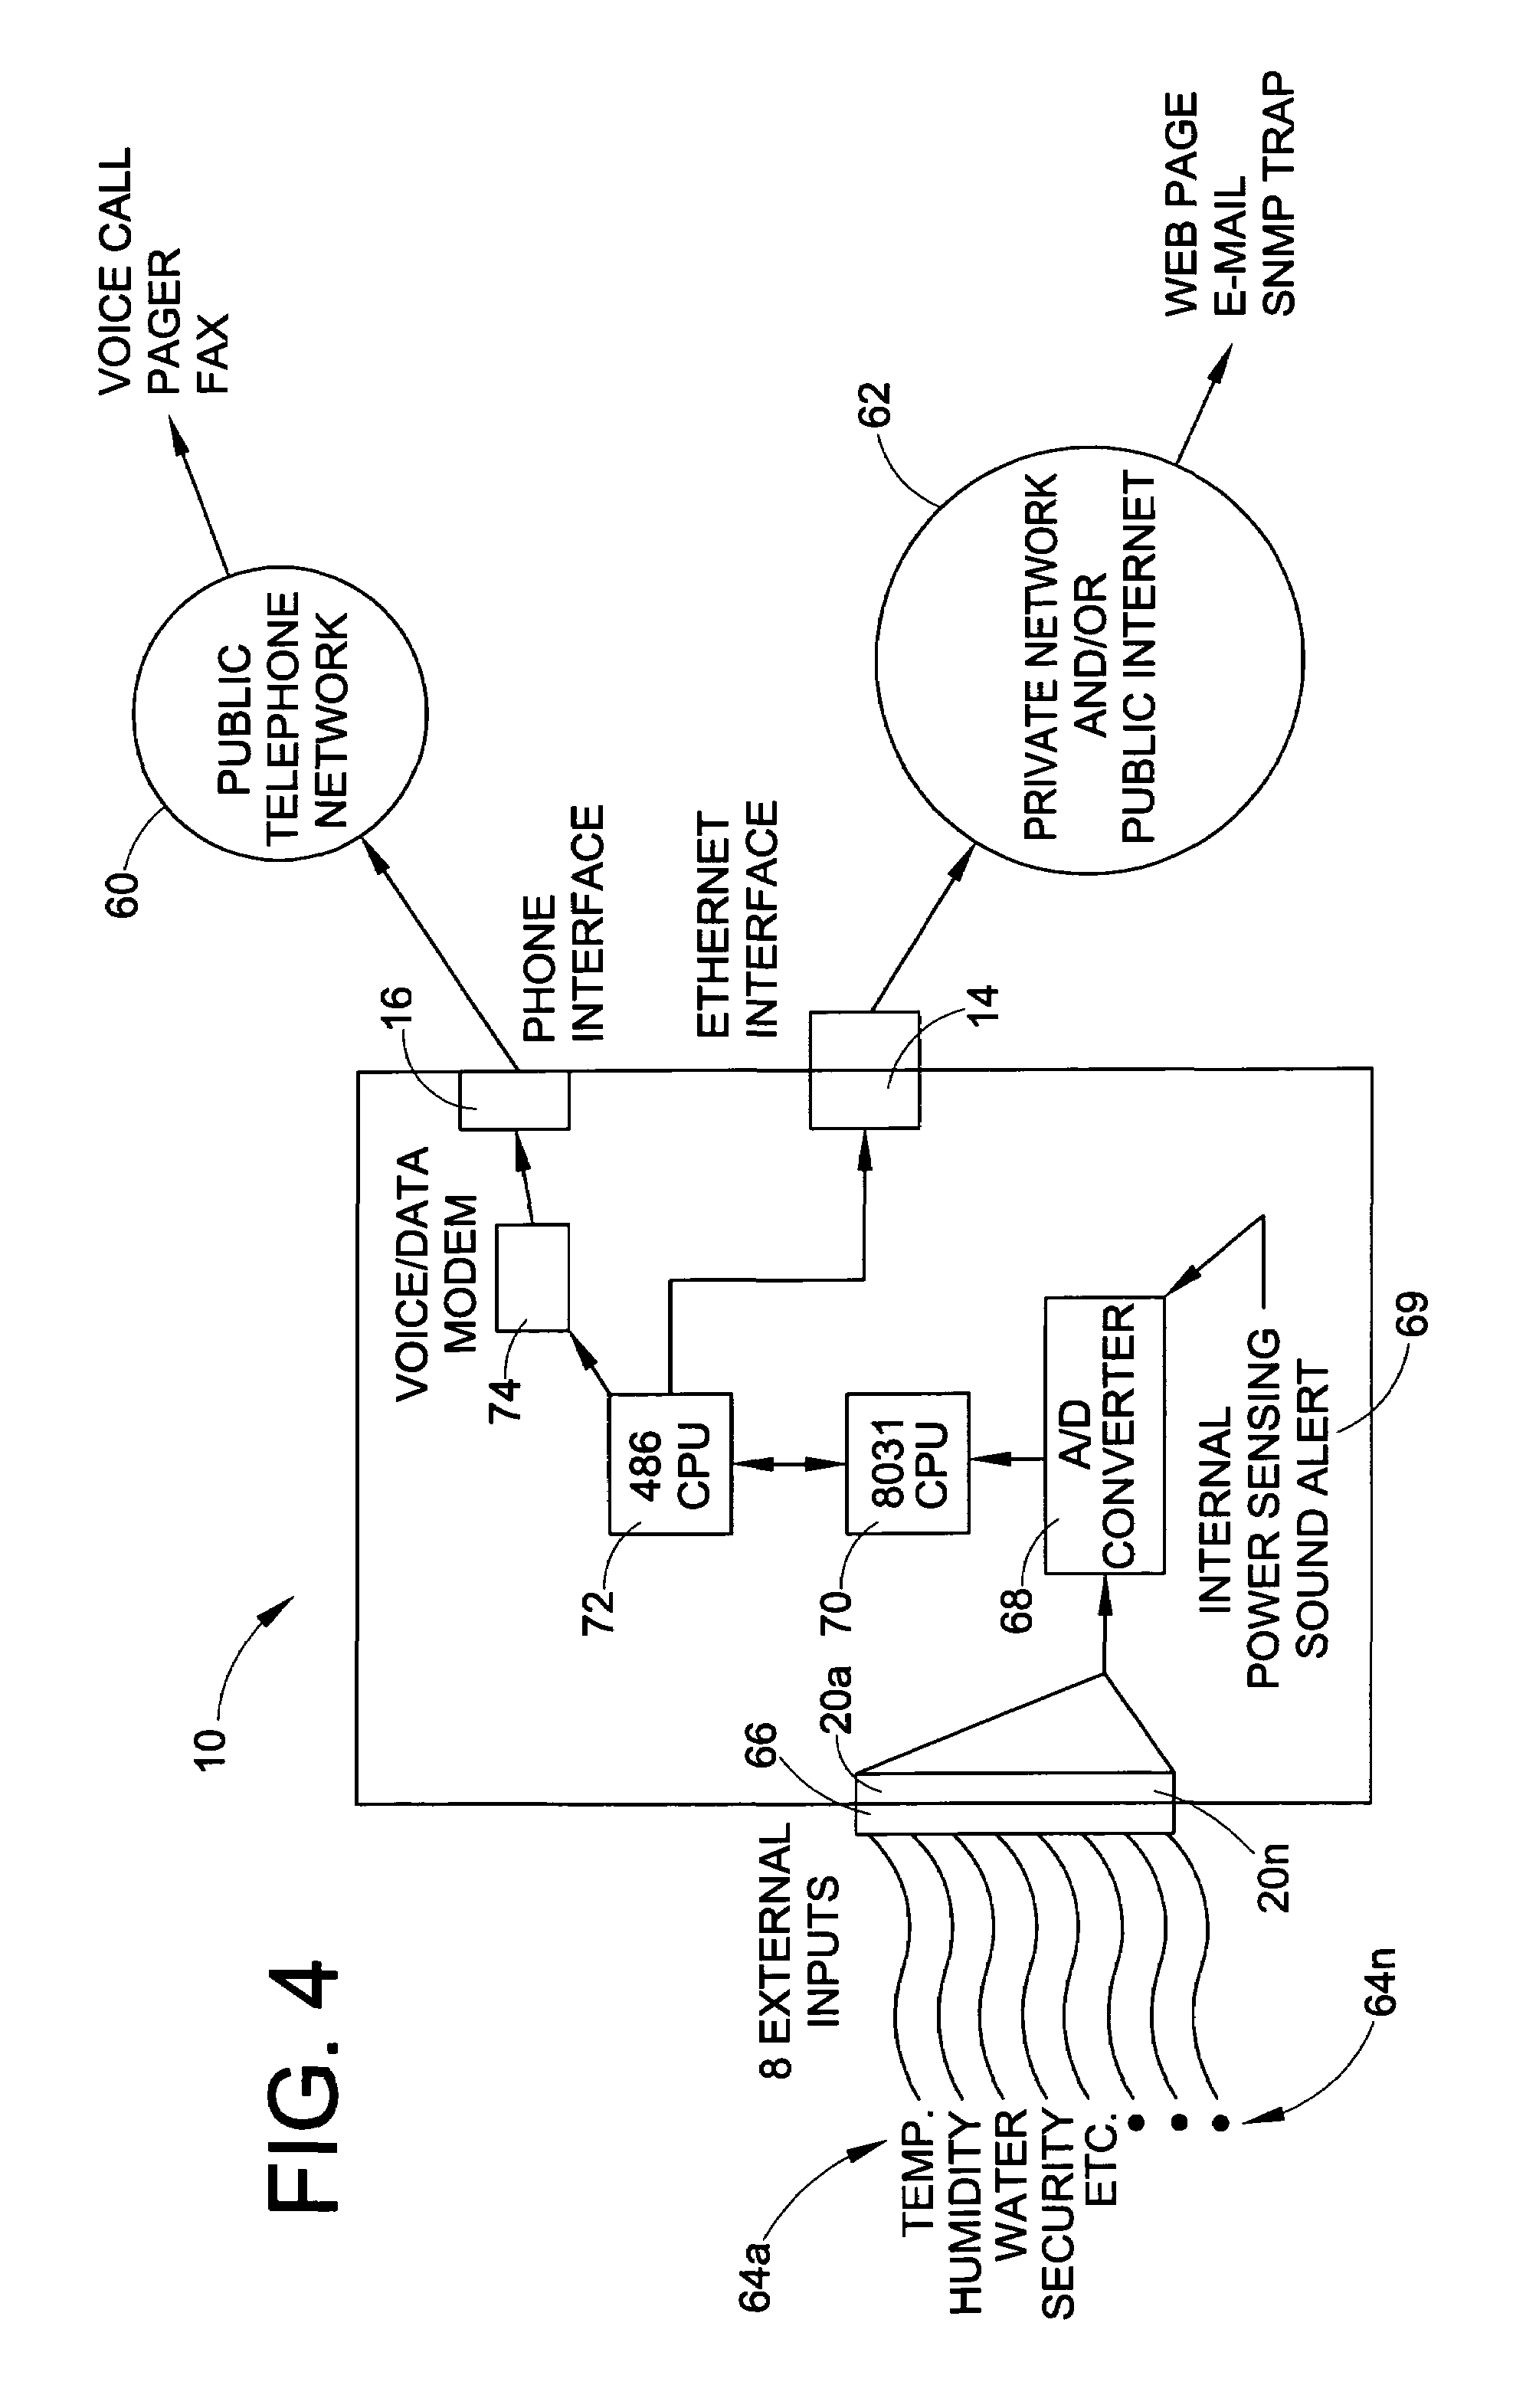 Environmental and security monitoring system with flexible alarm notification and status capability